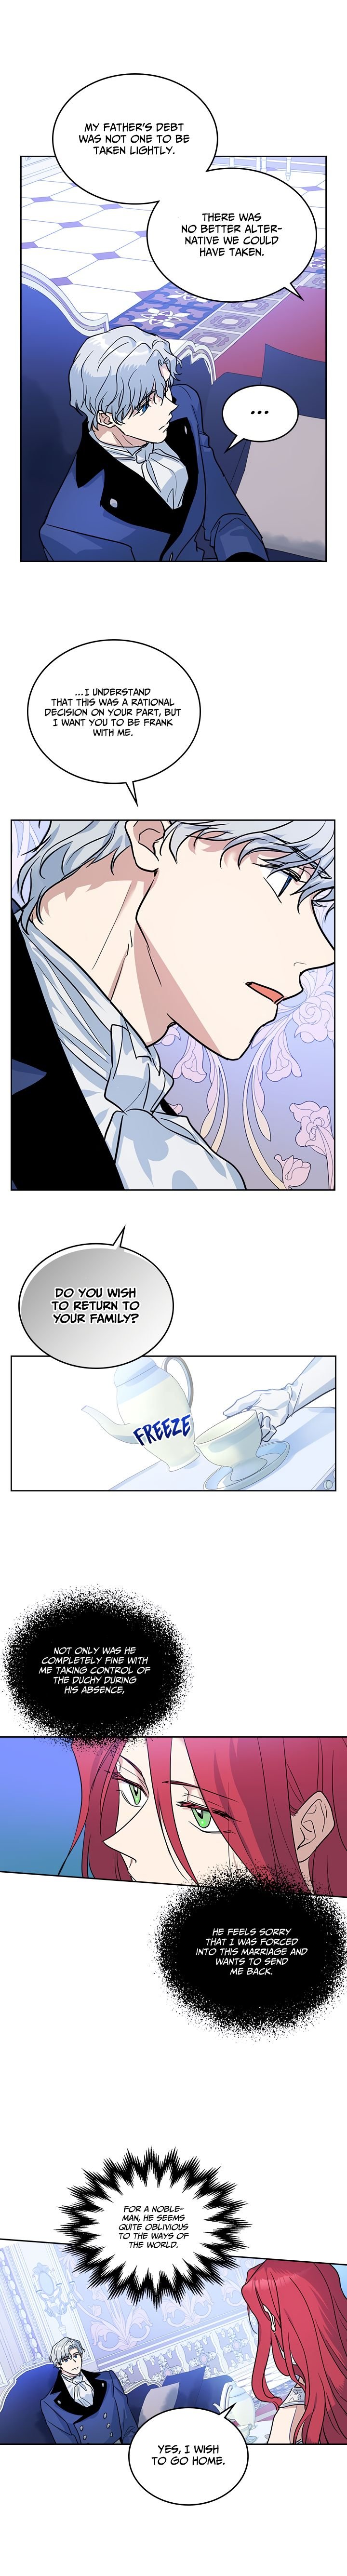 the-lady-and-the-beast-chap-31-10